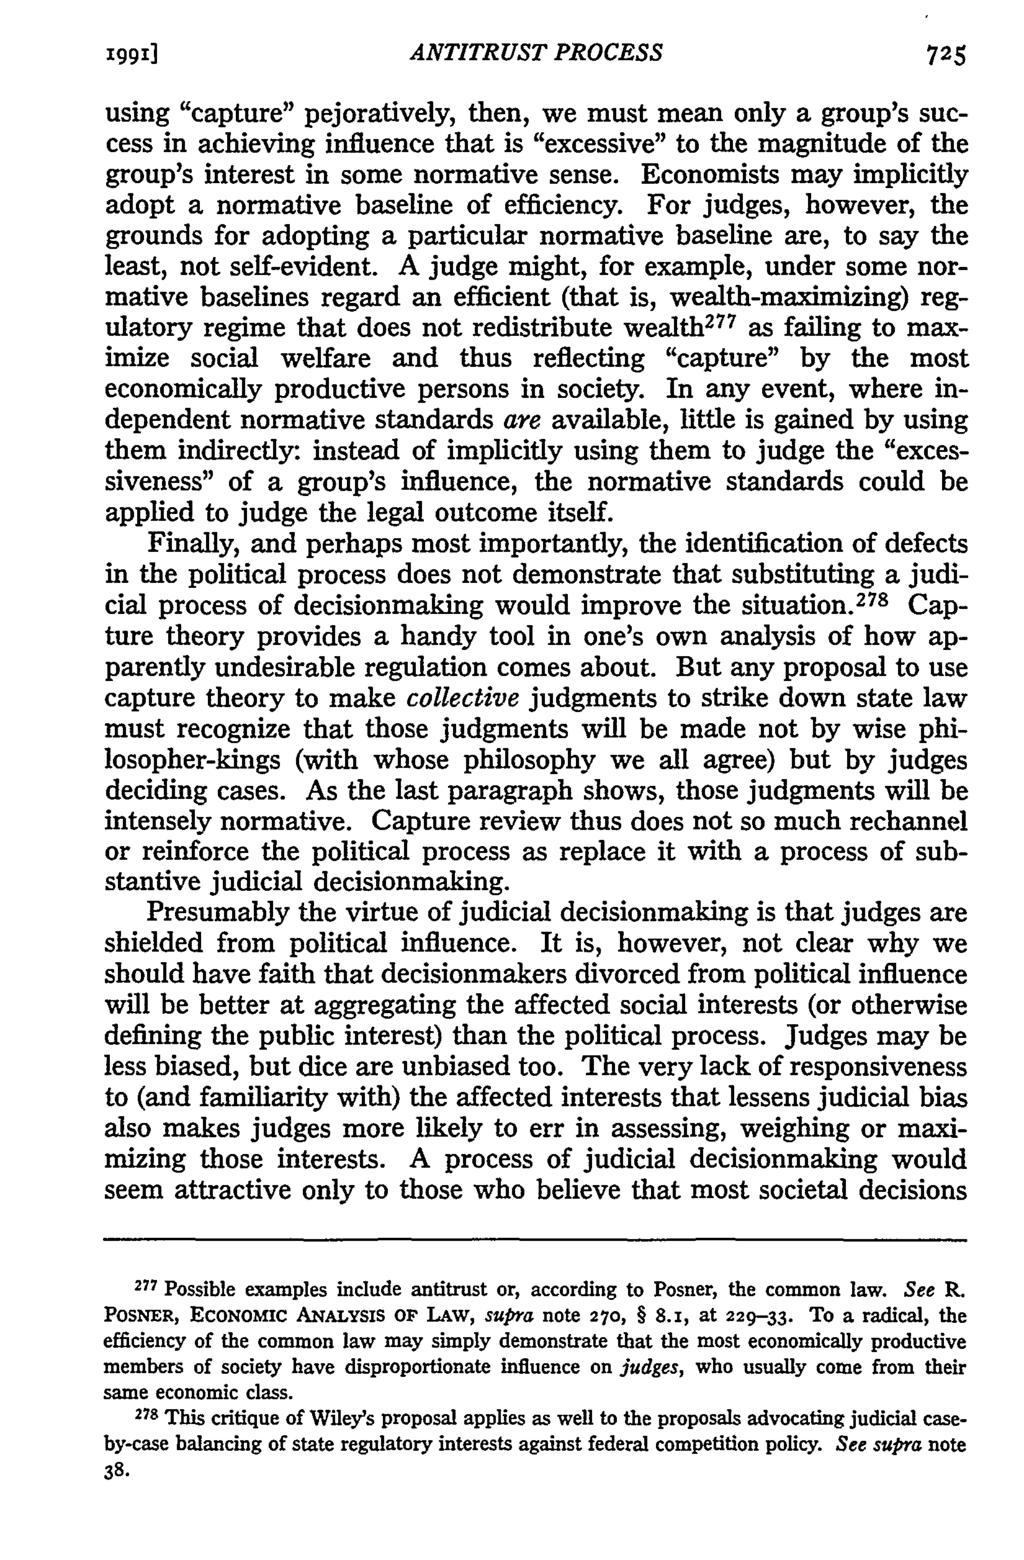 1991] ANTITRUST PROCESS using "capture" pejoratively, then, we must mean only a group's success in achieving influence that is "excessive" to the magnitude of the group's interest in some normative